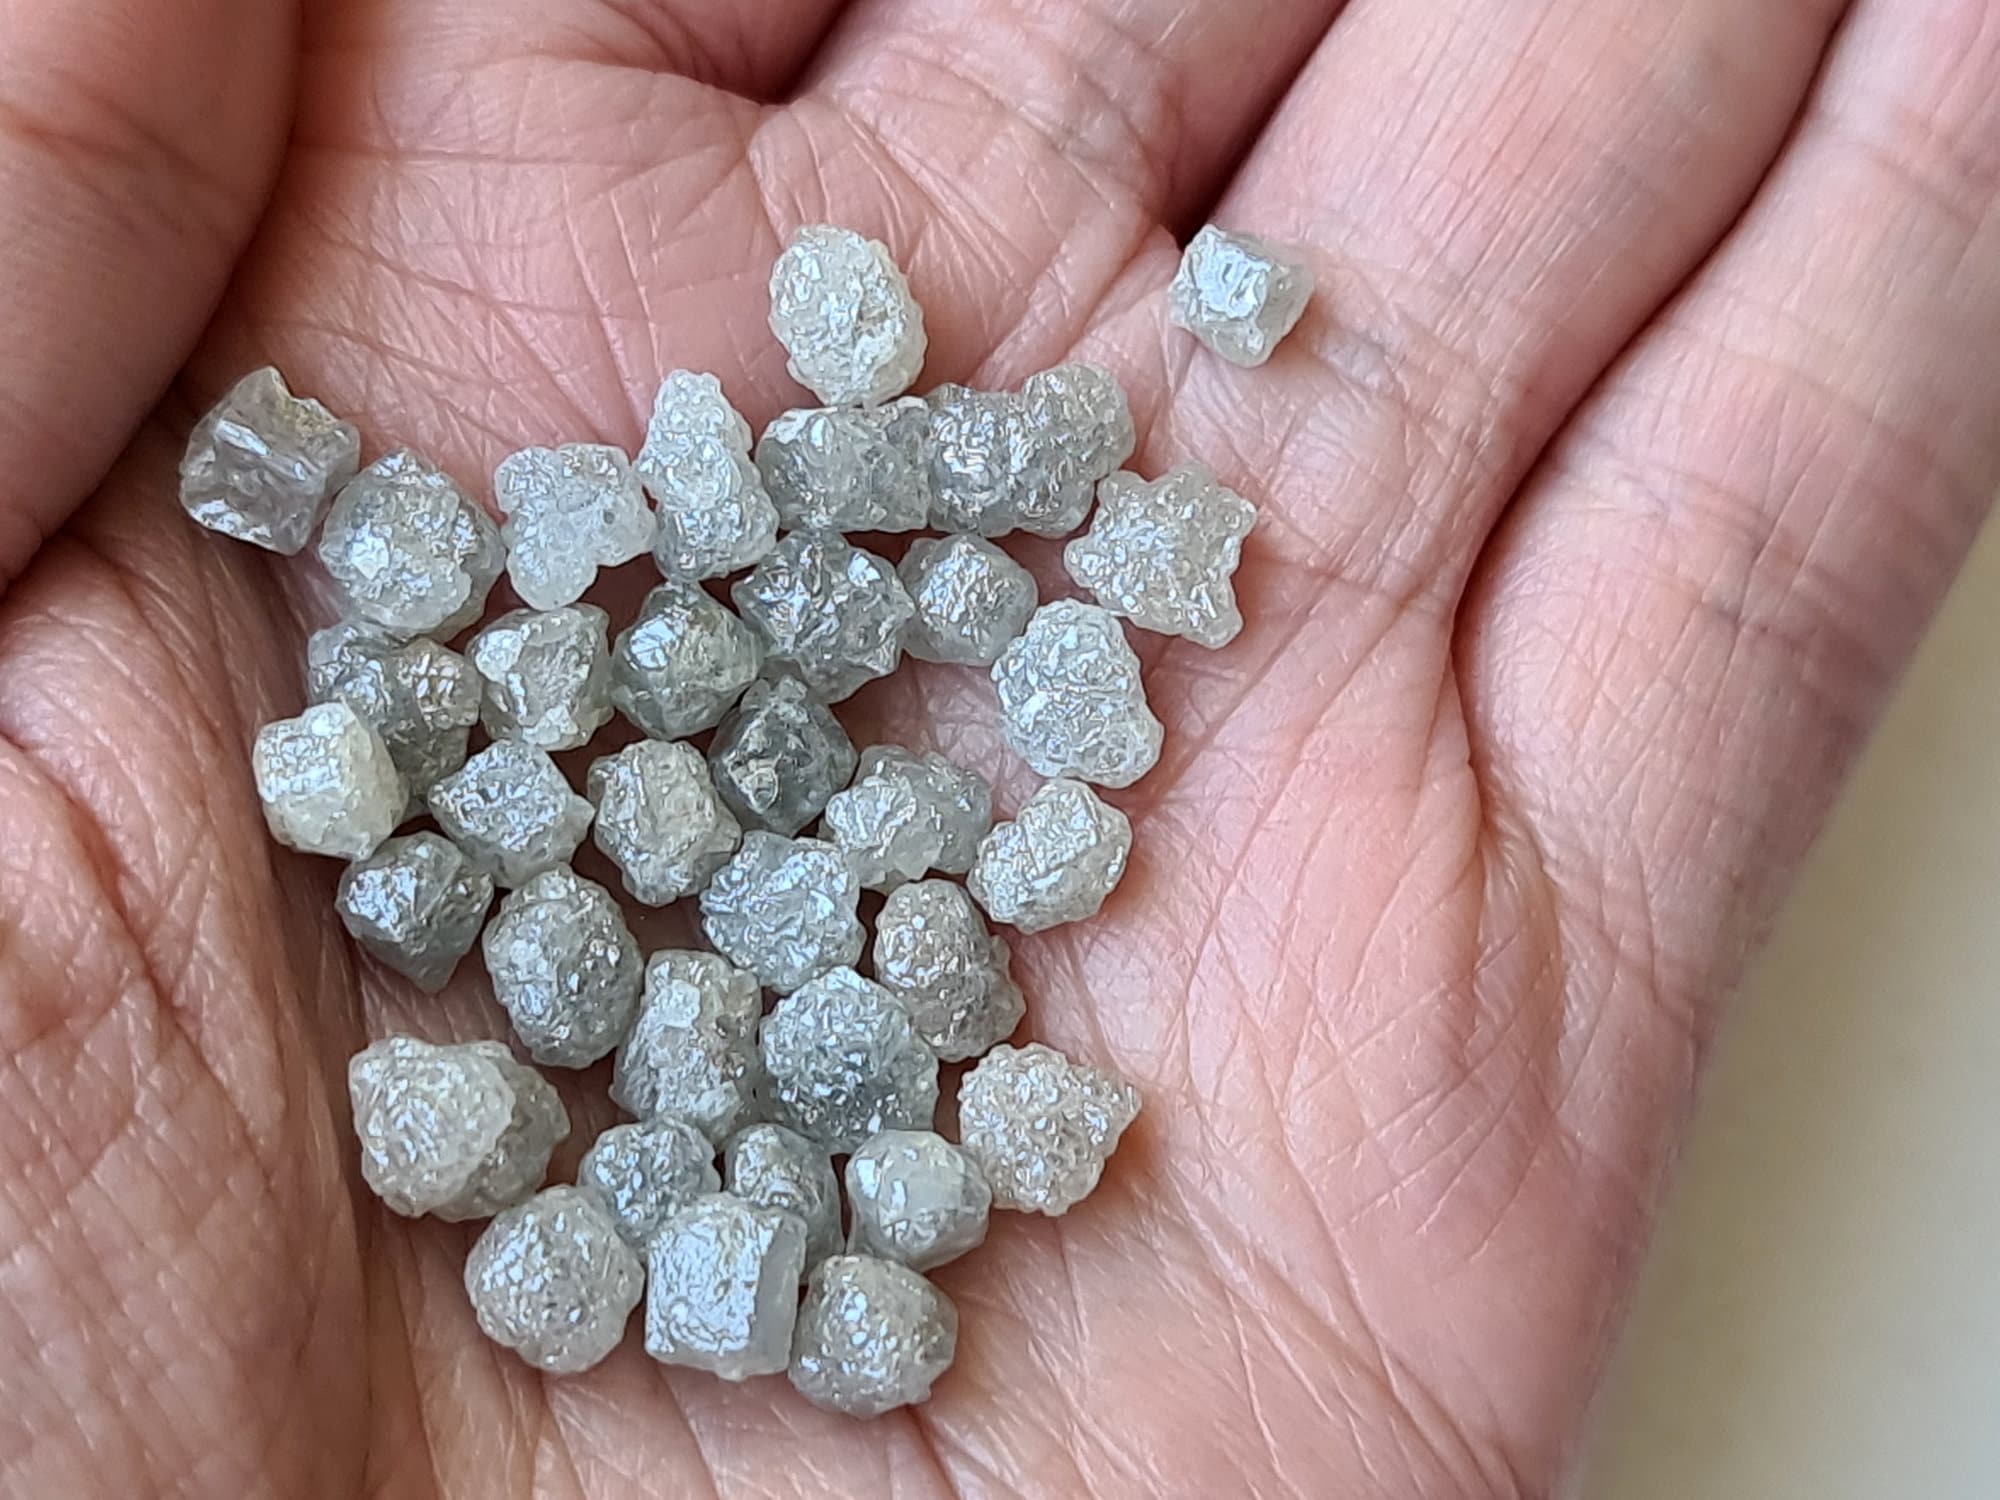 5-6.5mm White Grey Raw Diamond, 5 Pcs Loose Natural Rough White Grey Earth  Mined Uncut Diamond for Jewelry PPRGK1 